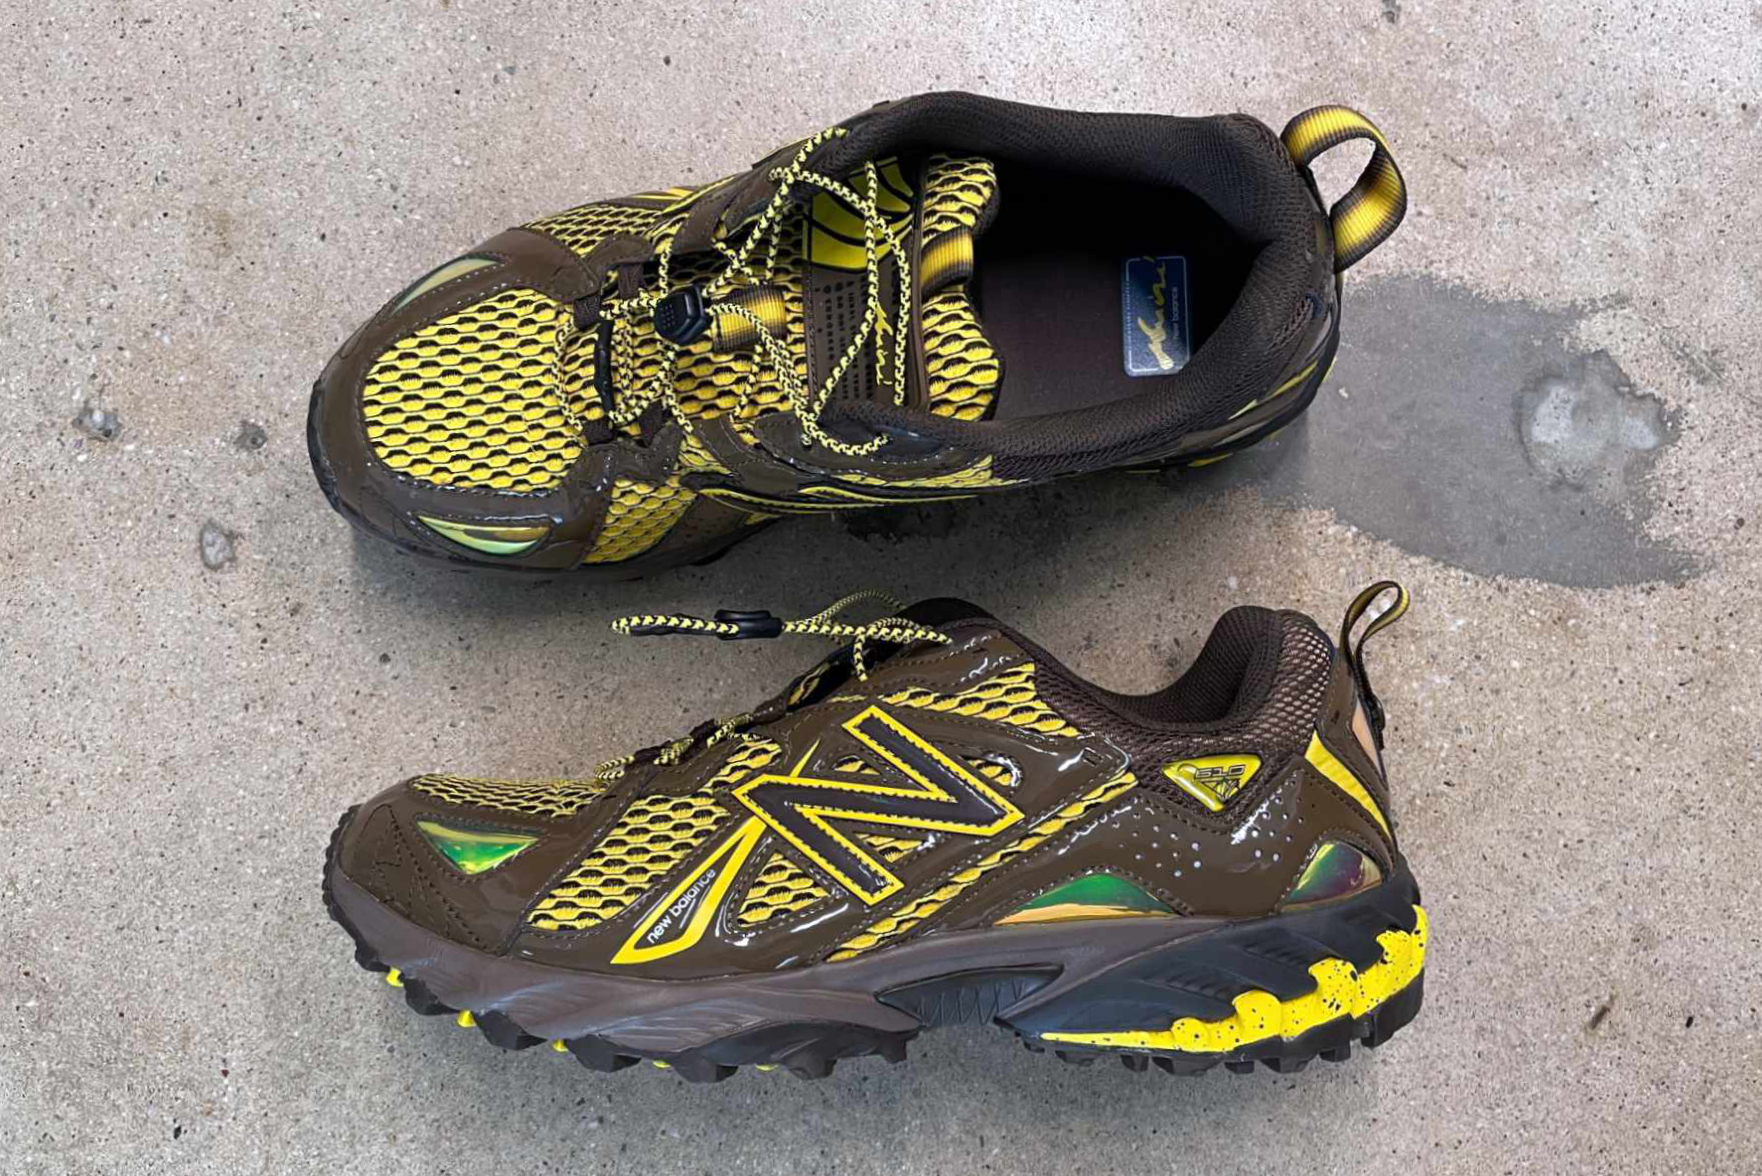 Amine's New Balance 610 shoe, "The Mooz," in brown and yellow colors photographed on the ground